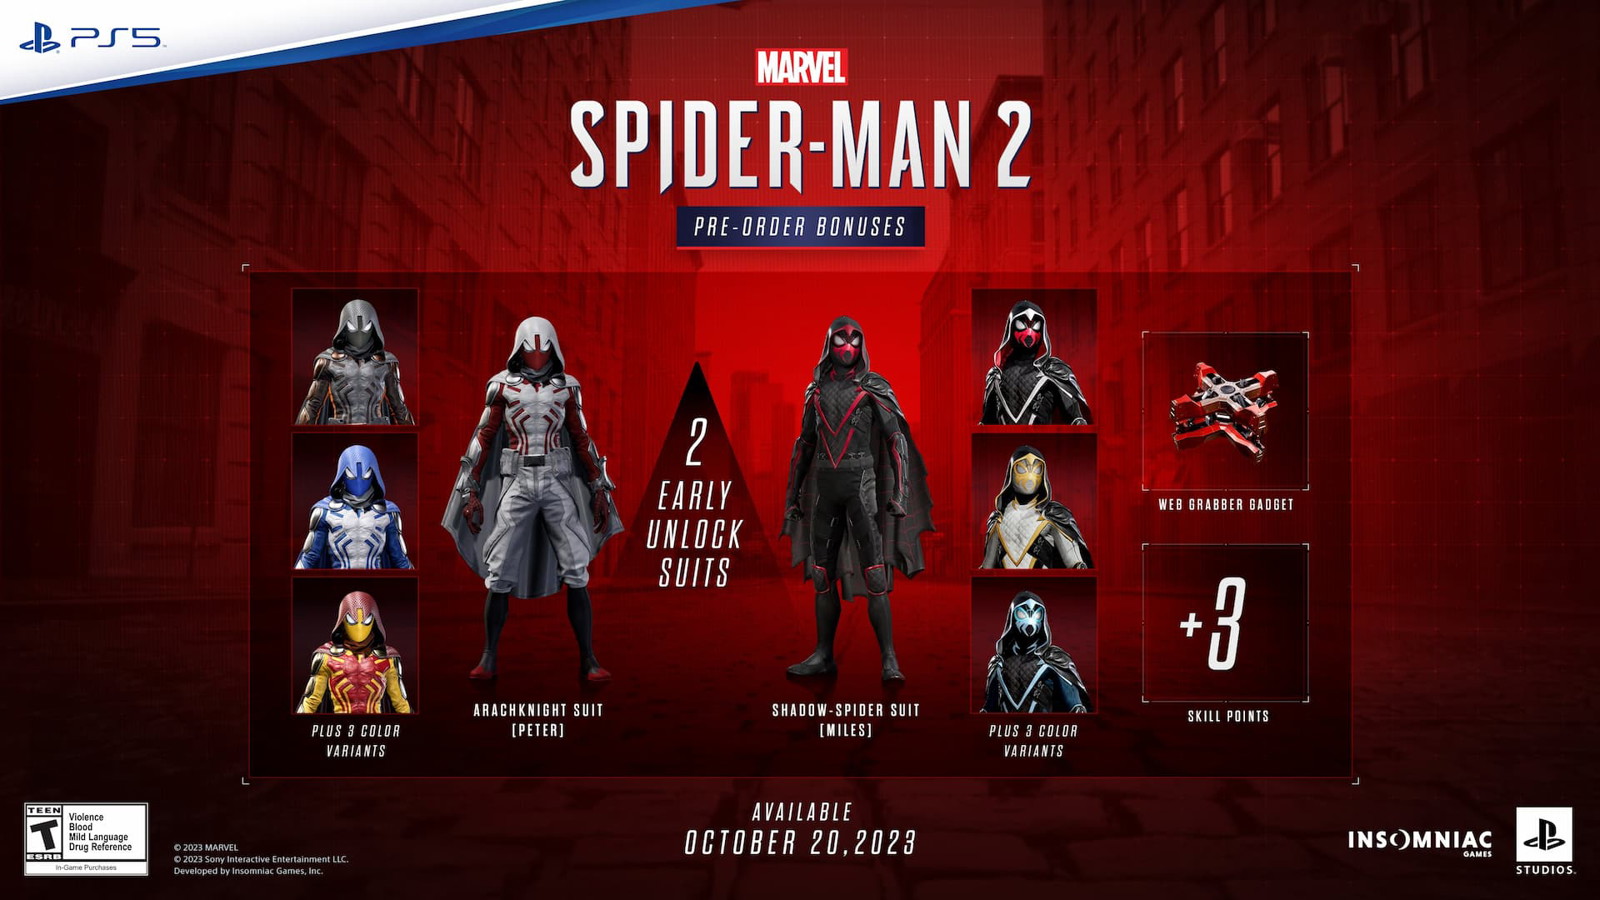 Arachknight Suit and Shadow-Spider Suit will have different variants